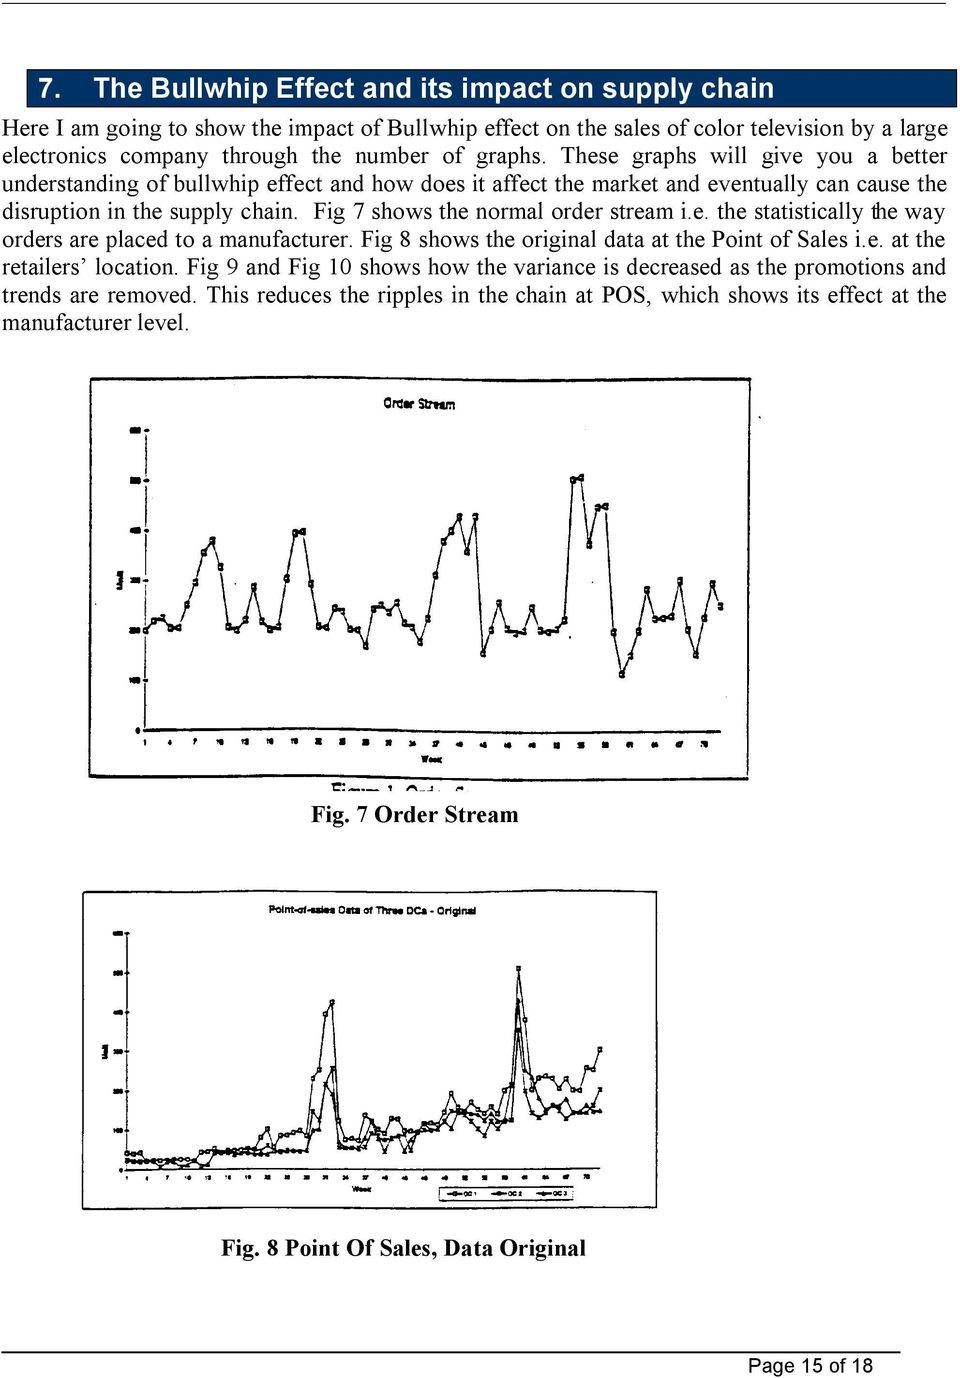 Fig 7 shows the normal order stream i.e. the statistically the way orders are placed to a manufacturer. Fig 8 shows the original data at the Point of Sales i.e. at the retailers location.